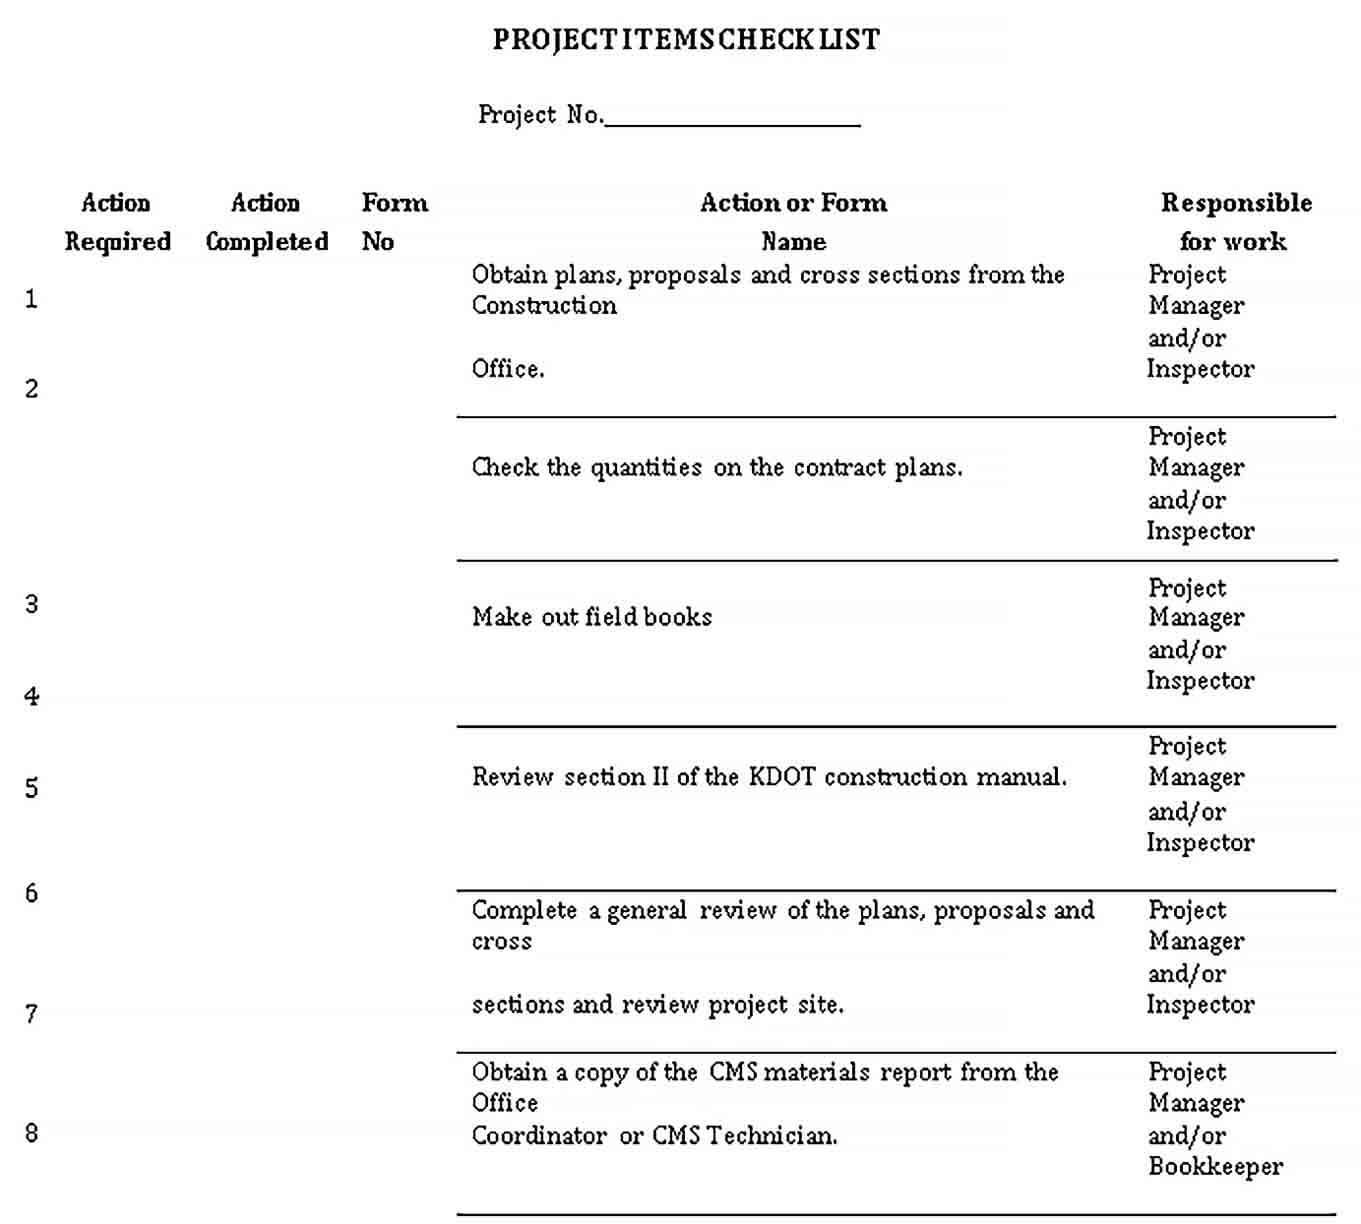 Sample Project Items Checklist Template